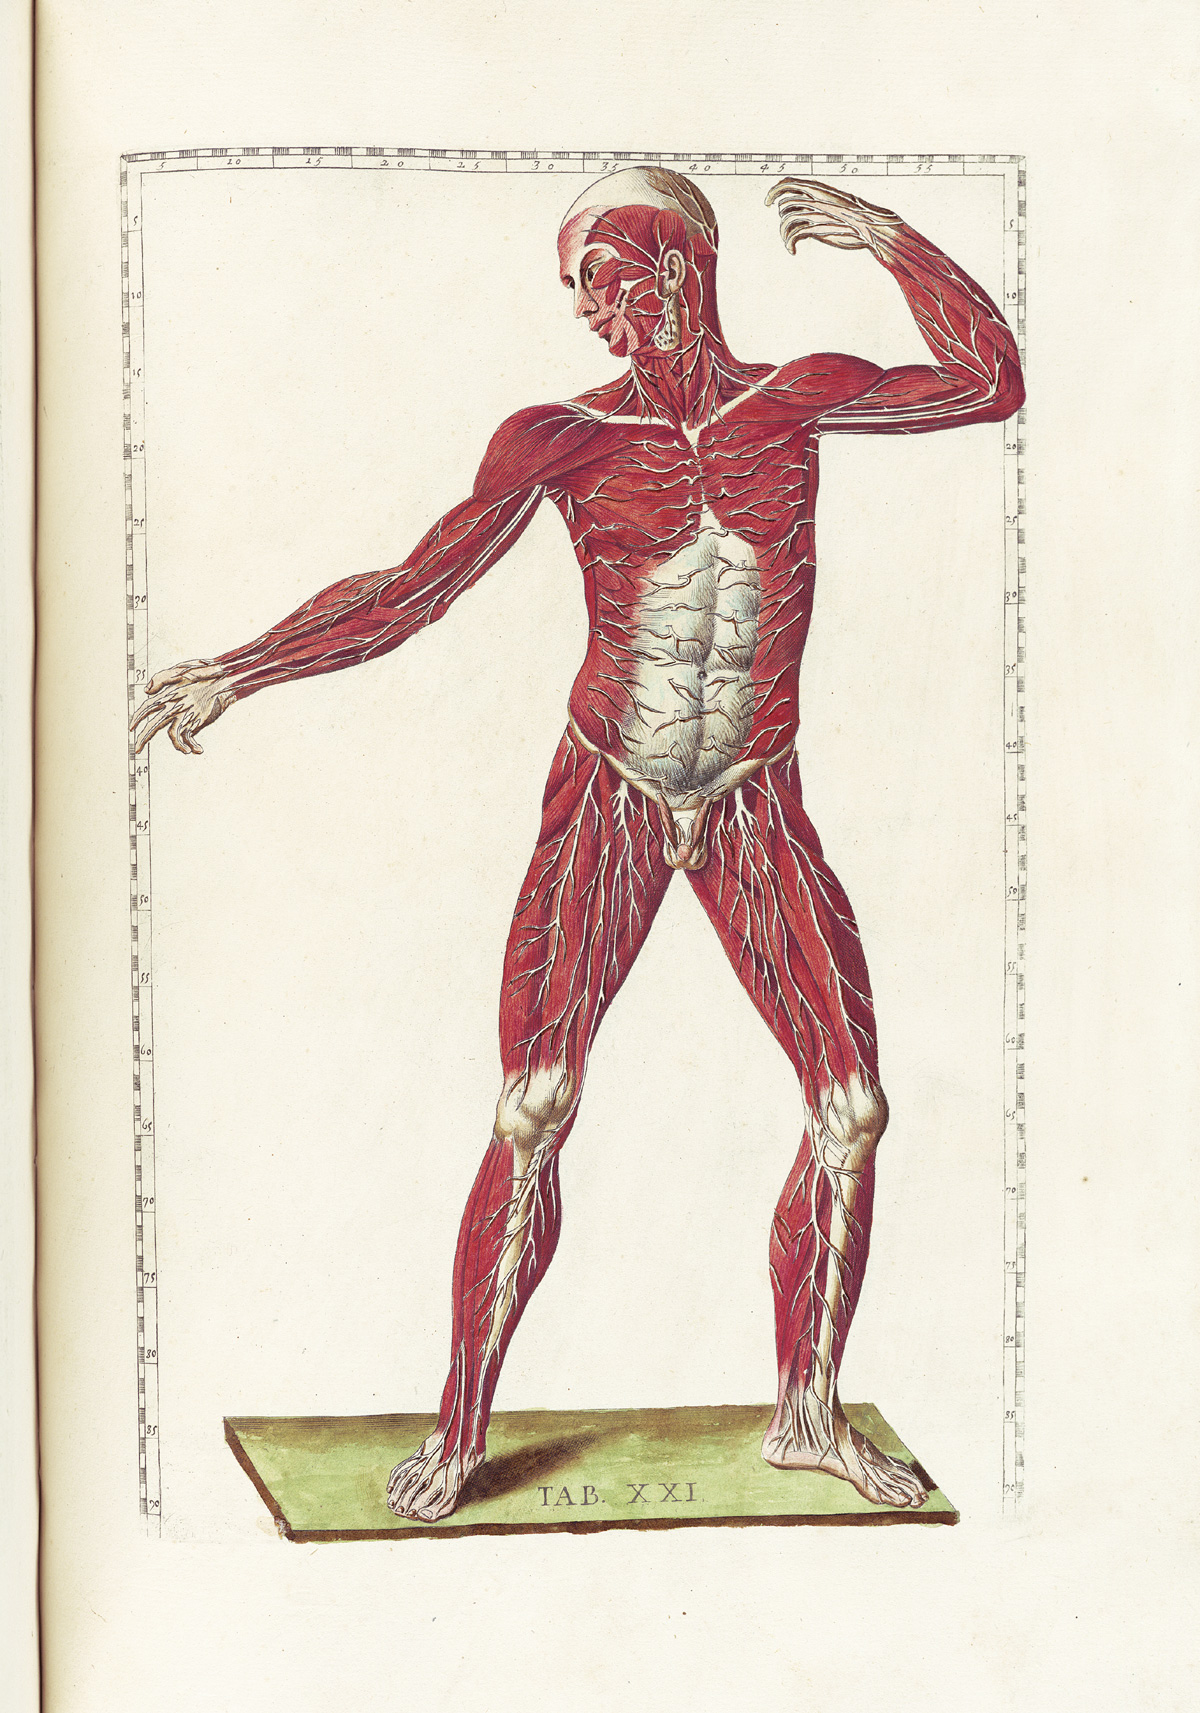 Hand-colored etching of a facing standing figure with flesh removed to expose the muscles showing the pathways of the nerves, with emphasis on the nerves just below the skin; the figure is in a classical pose resembling a javelin thrower looking to the left side of the page with his left hand raised and bent at the elbow and right had extended forward.